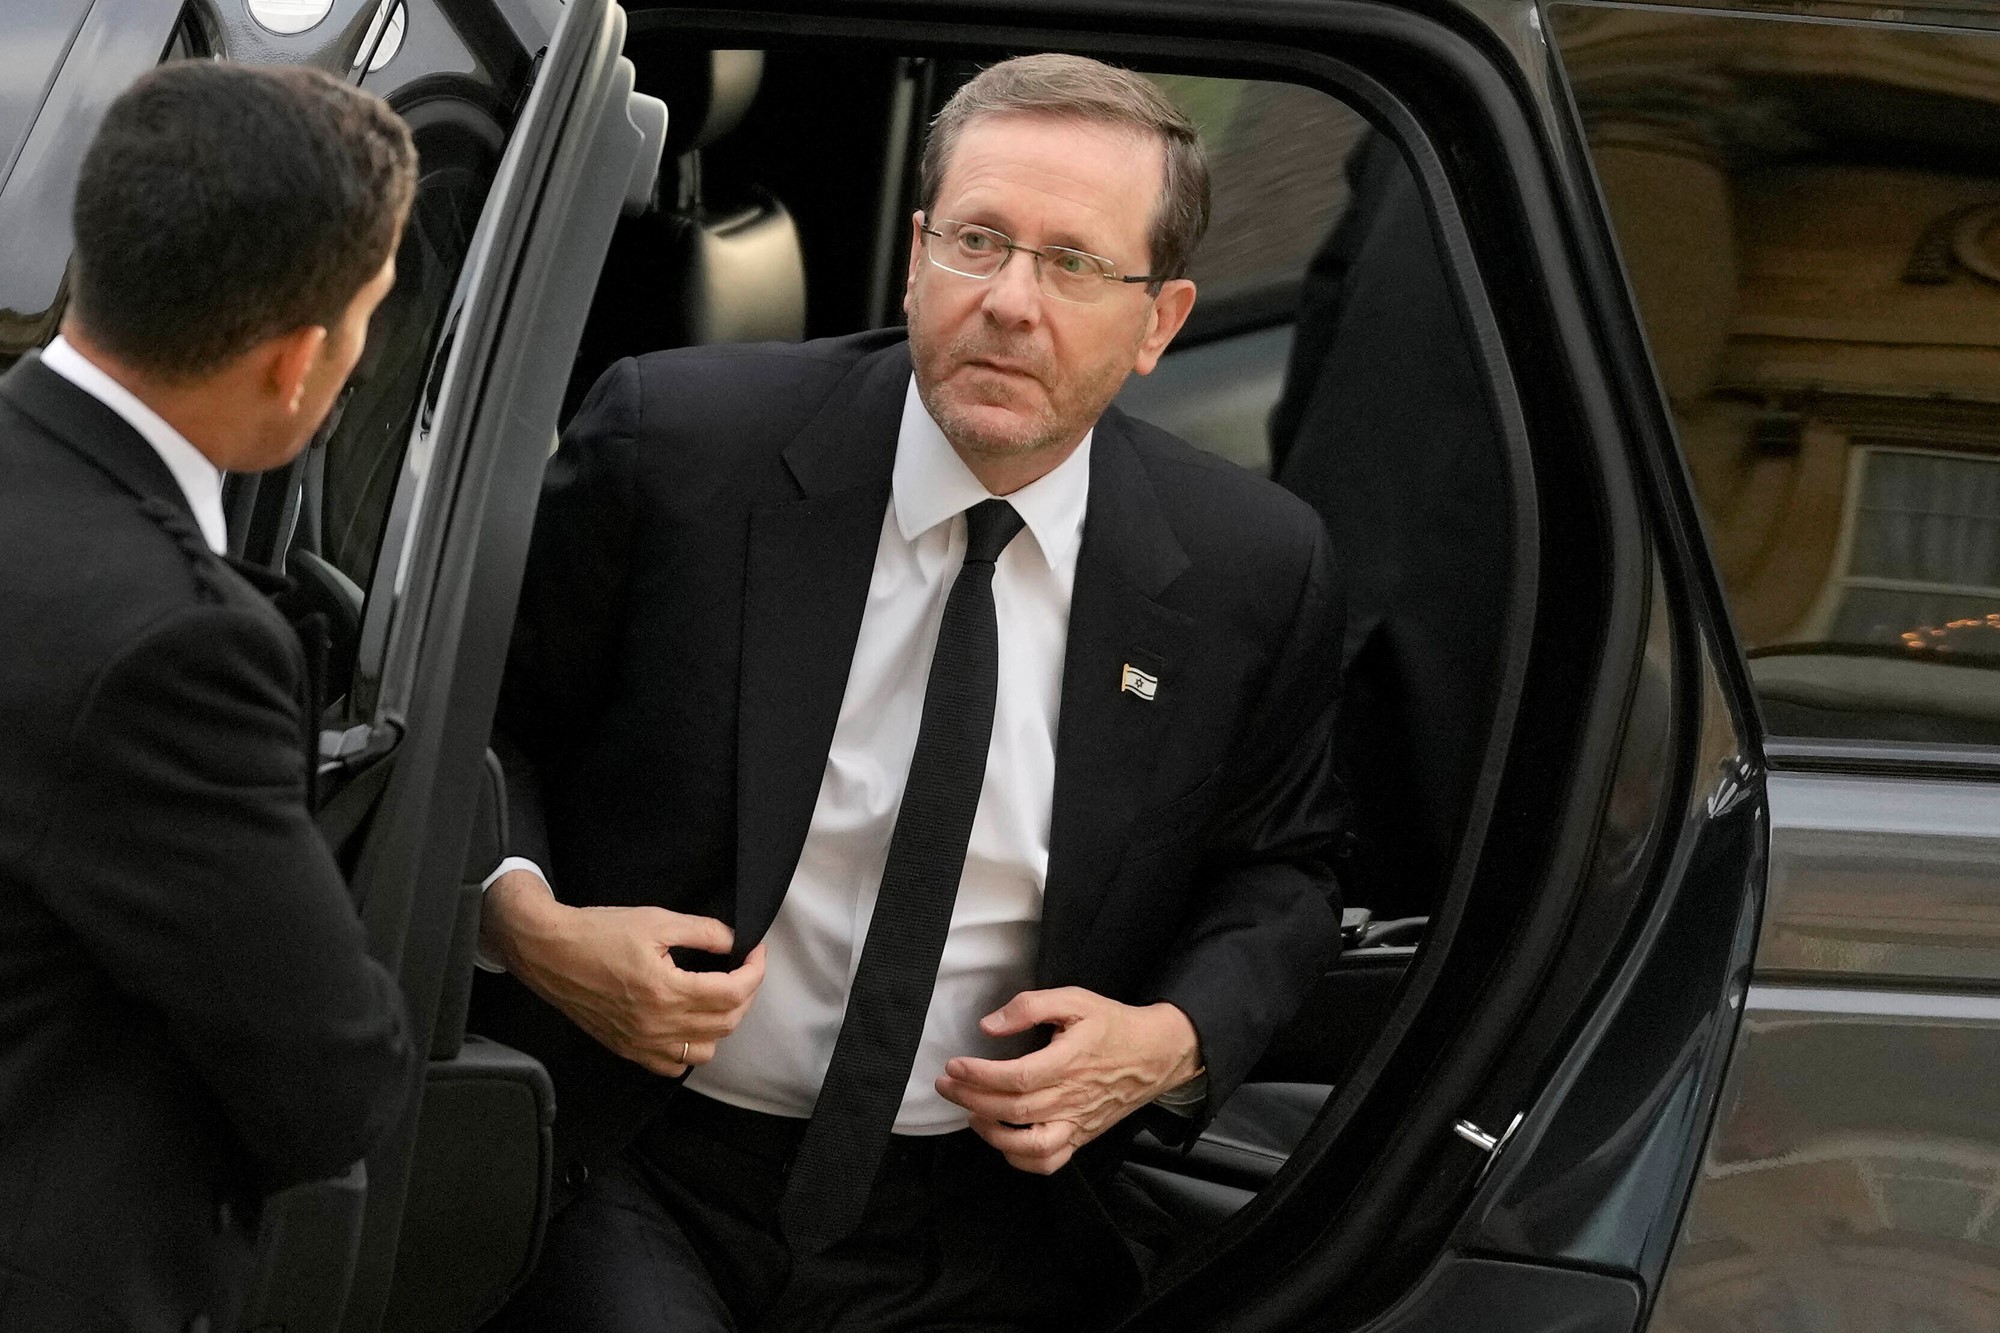 Israel's President Isaac Herzog getting out of a car